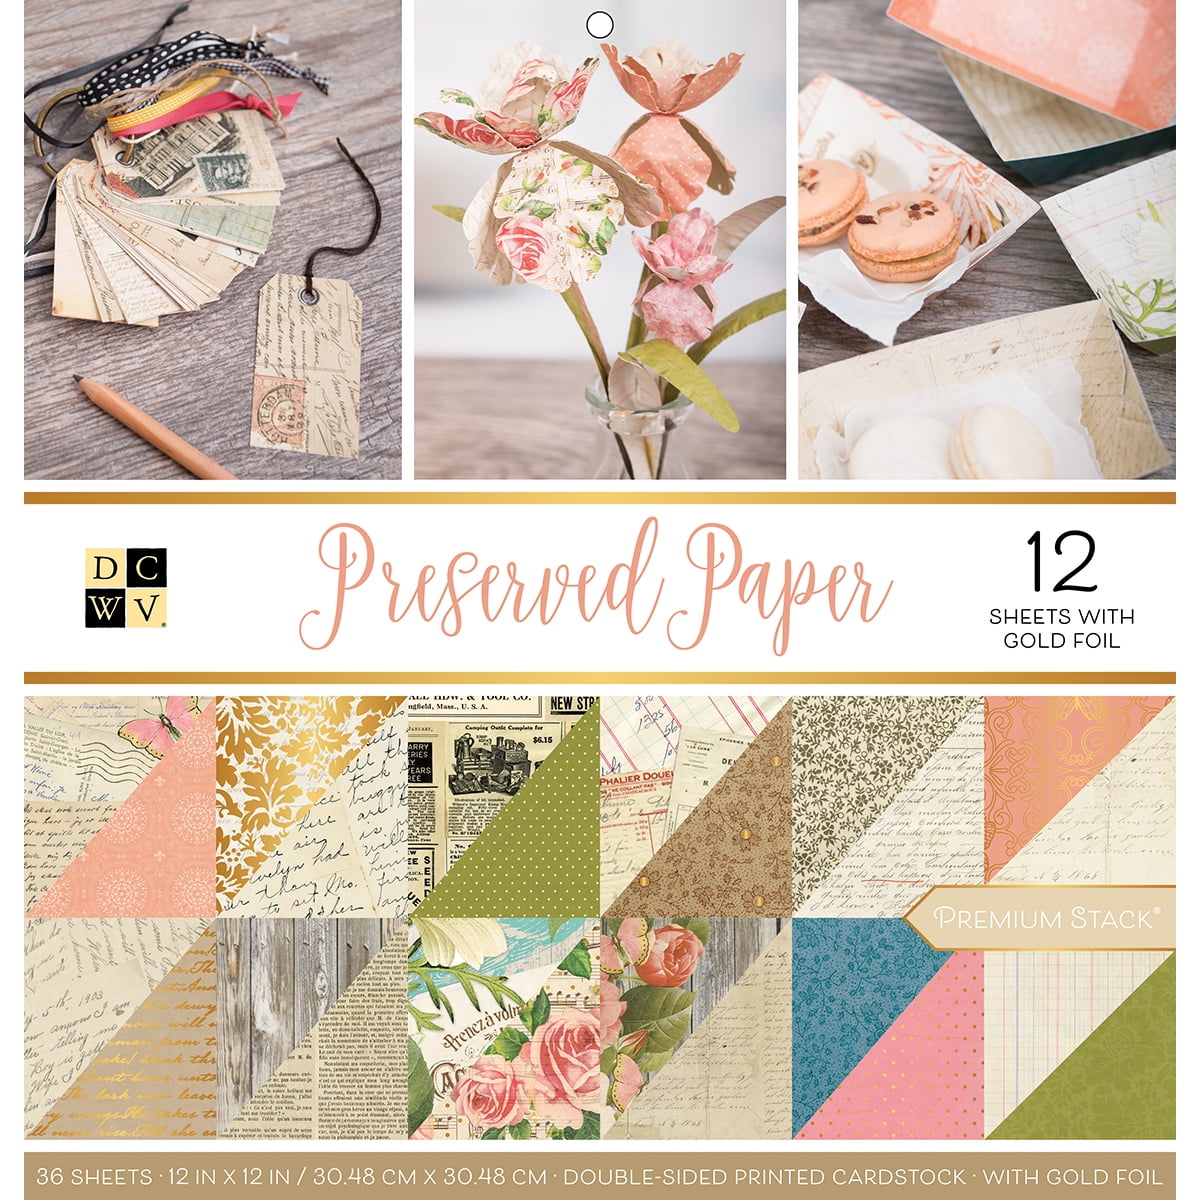 Cardstock 8.5 x 11 Paper Pack - Assorted Colored Scrapbook Paper 65lb -  Double Sided Card Stock for Crafts, Embossing, Cardmaking - 50 Sheets,  Solid